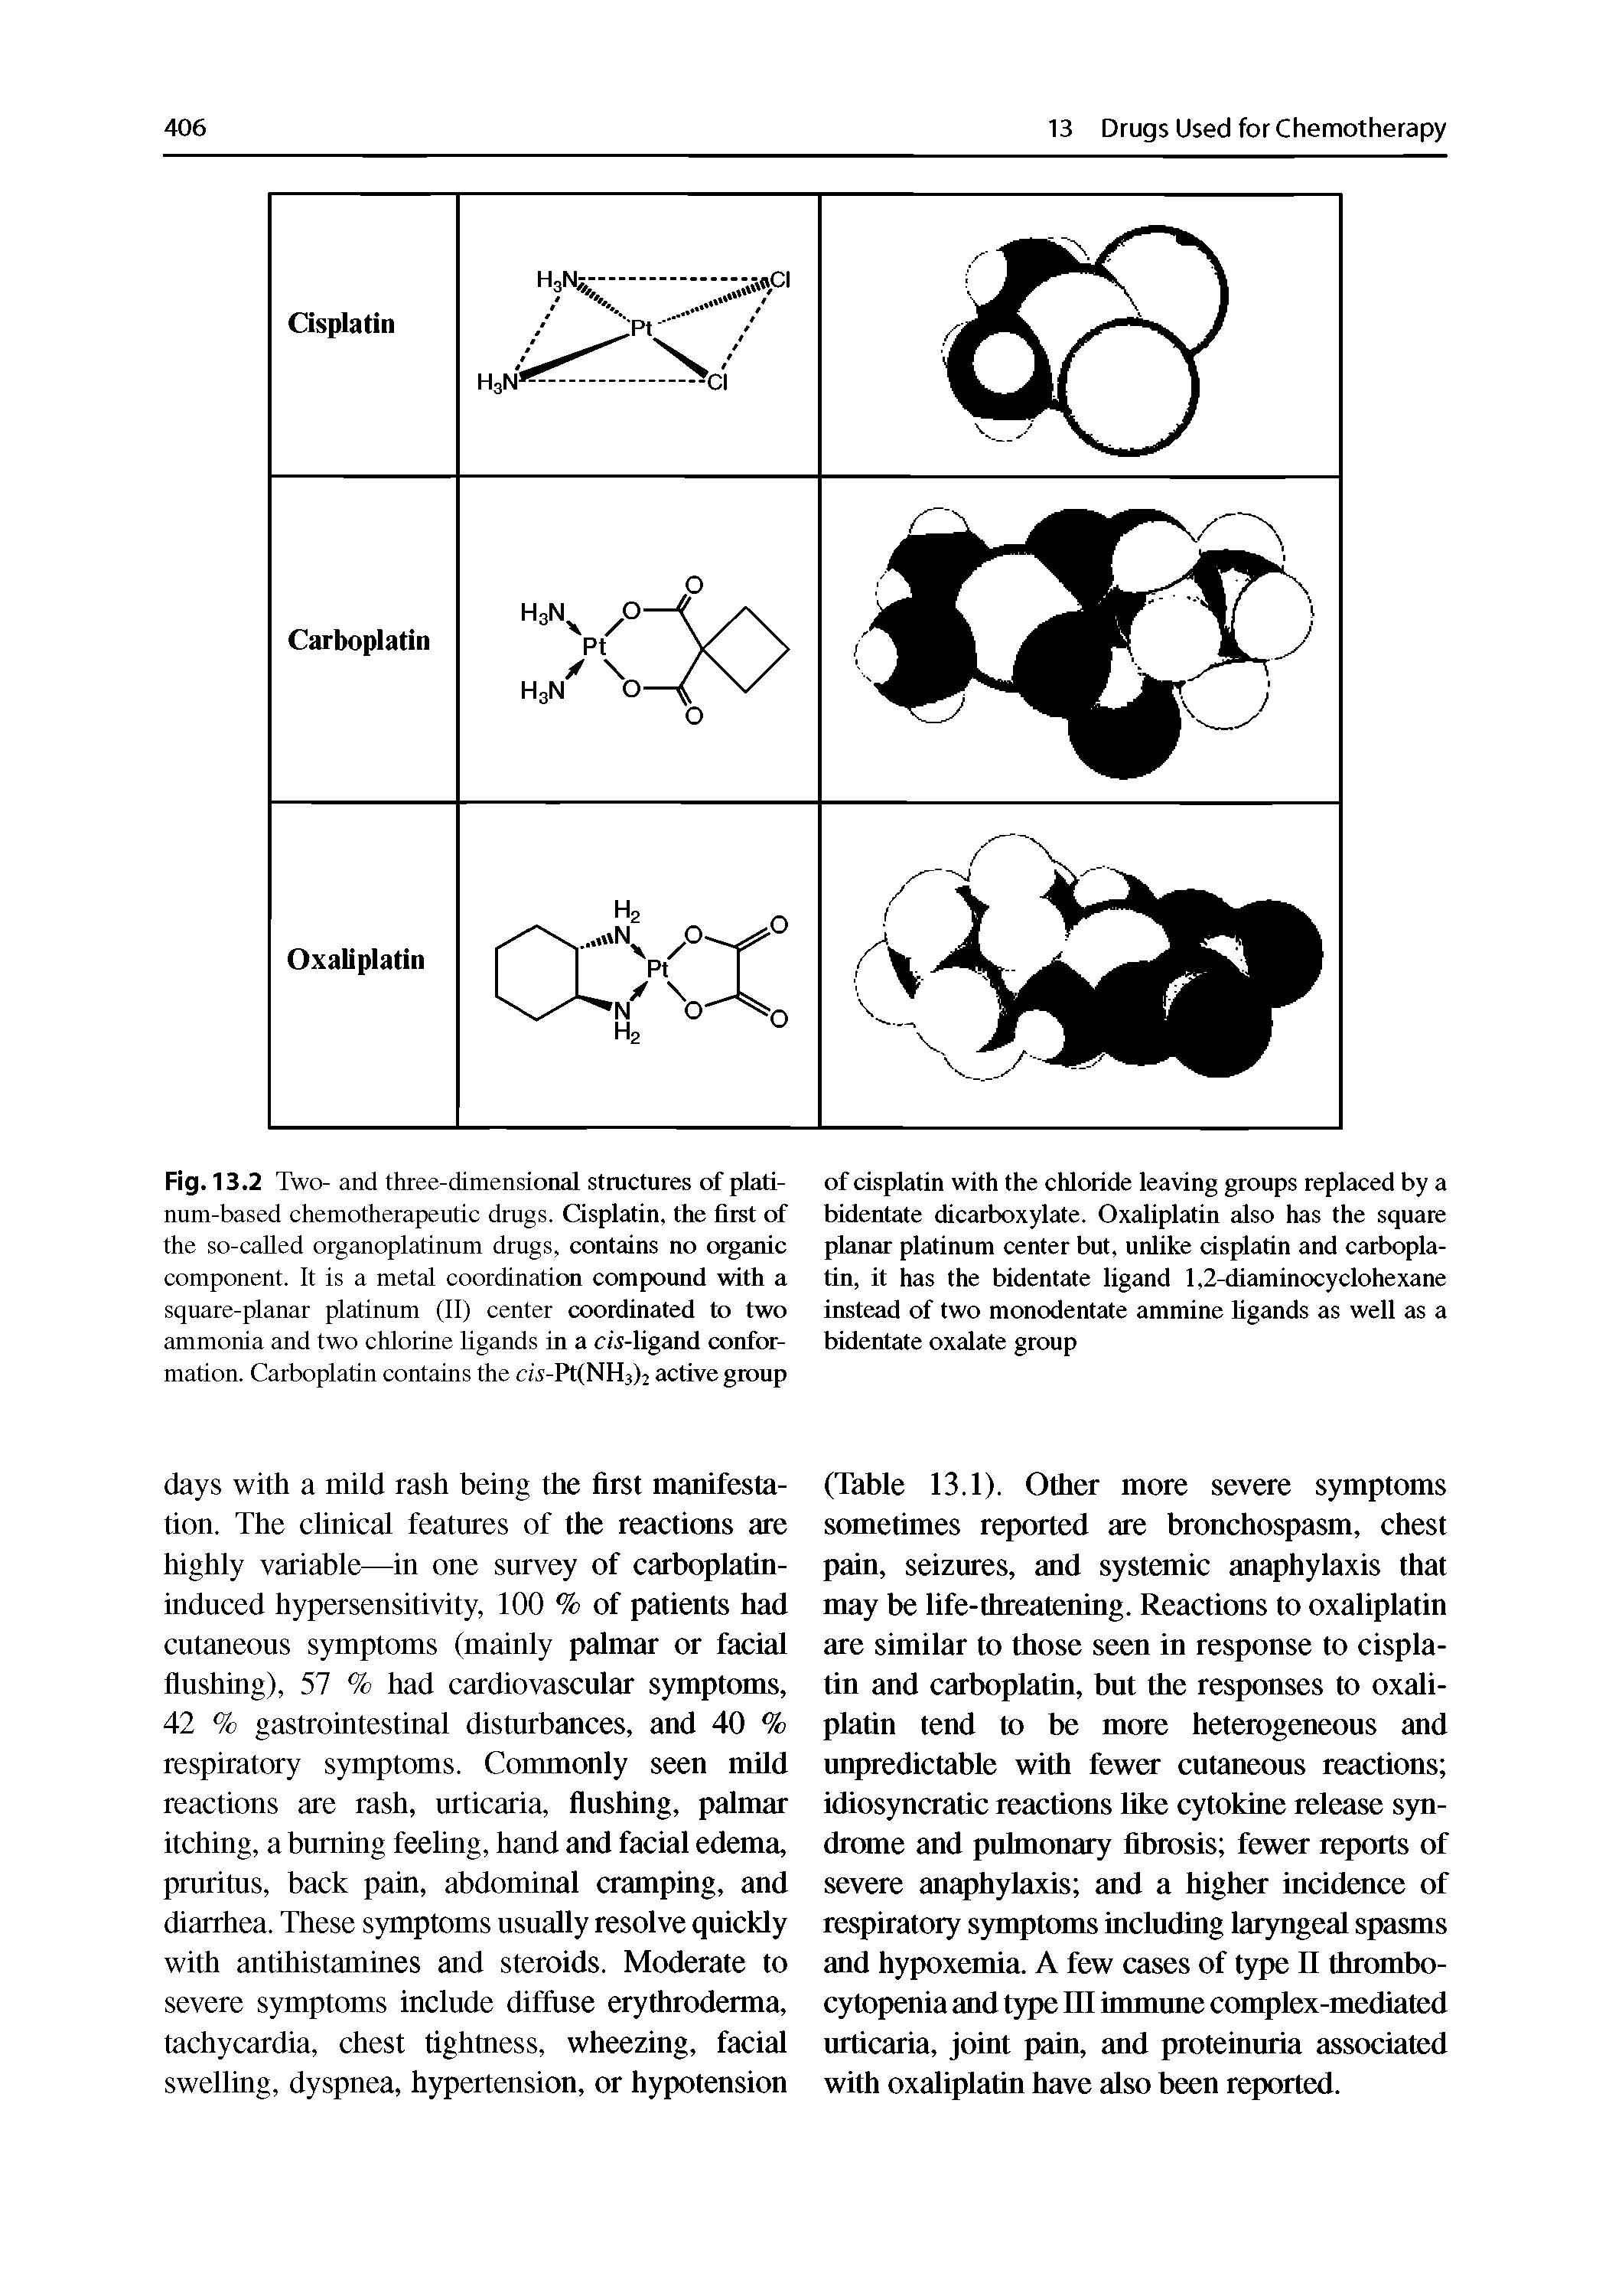 Fig. 13.2 Two- and three-dimensional structures of platinum-based chemotherapeutic drugs. Cisplatin, the first of the so-caUed organoplatinum drugs, contains no organic component. It is a metal coordination compound with a square-planar platinum (II) center coordinated to two ammonia and two chlorine ligands in a cw-ligand conformation. Carboplatin contains the CM-Pt(NH )2 active group...